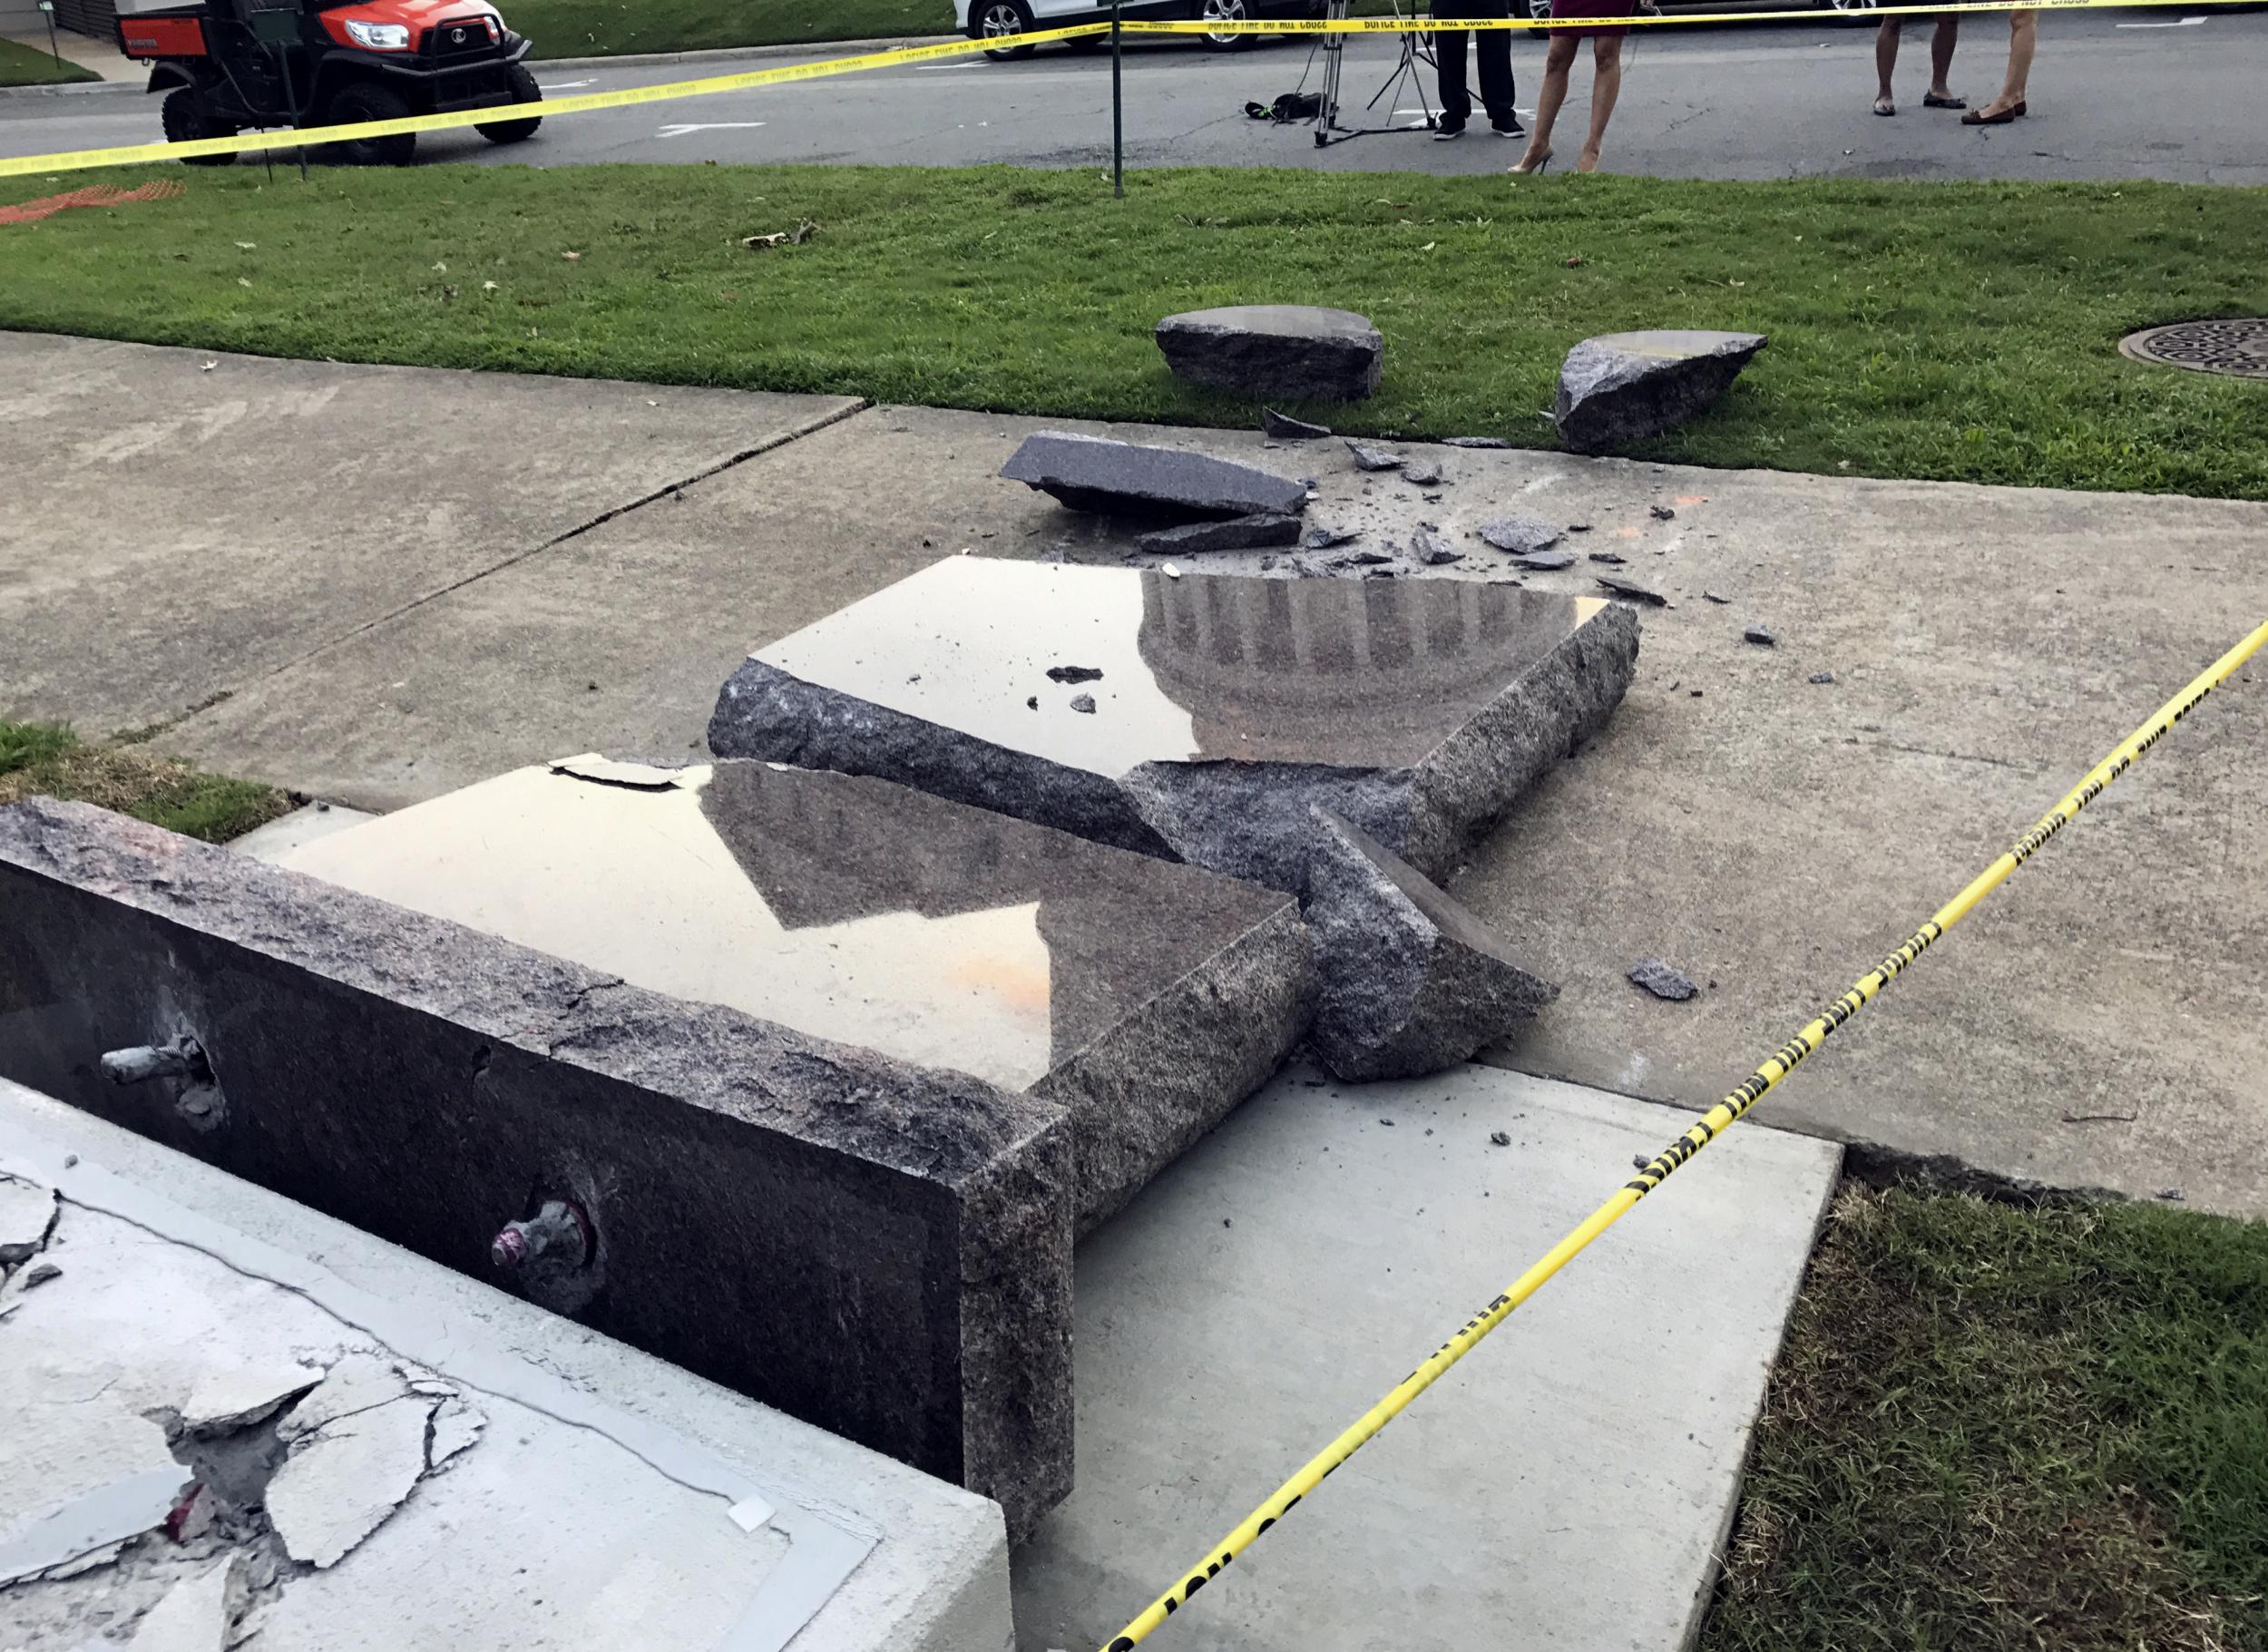 The driver allegedly smashed a similar monument in Oklahoma two years ago